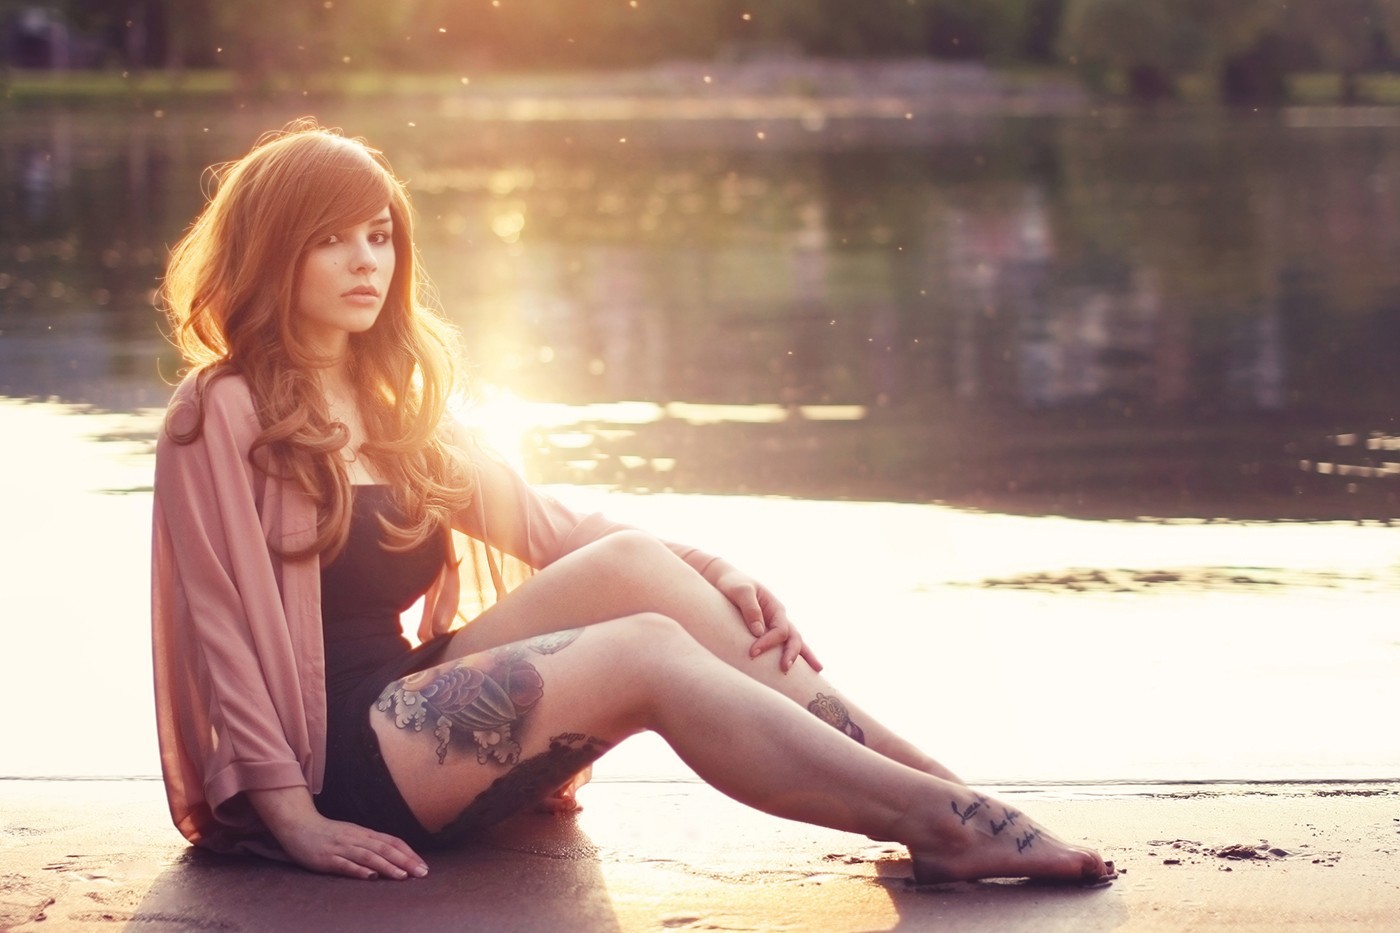 People 1400x933 tattoo women model looking at viewer sunlight sand legs Julia Coldfront women outdoors inked girls natural light sitting water outdoors barefoot minidress miniskirt long hair pointed toes